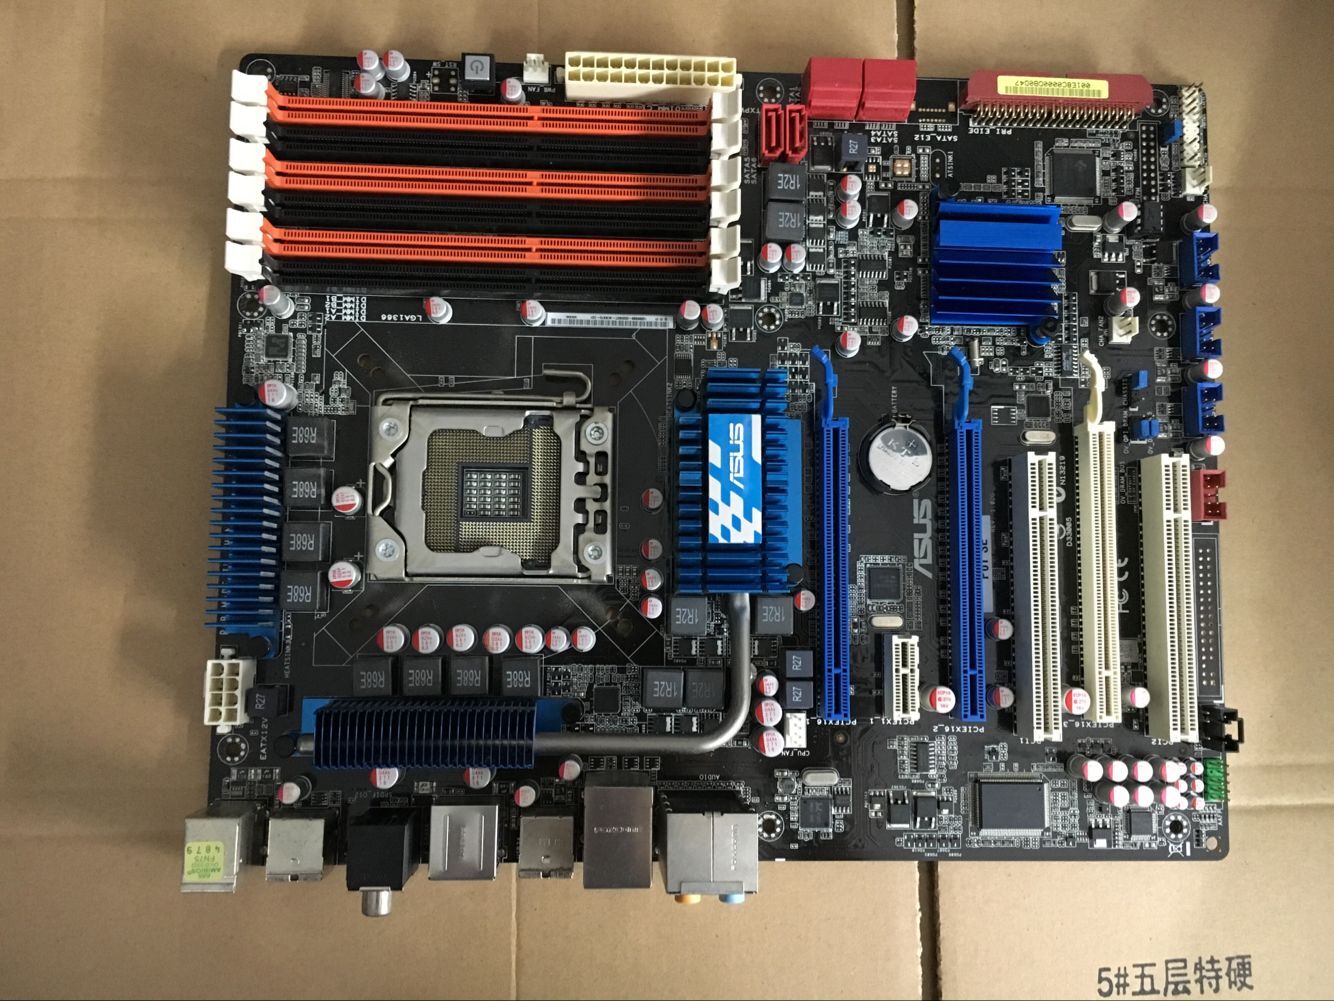 ASUS P6T SE Motherboard Chipset Intel X58 LGA1366 DDR3 With I/O Shield